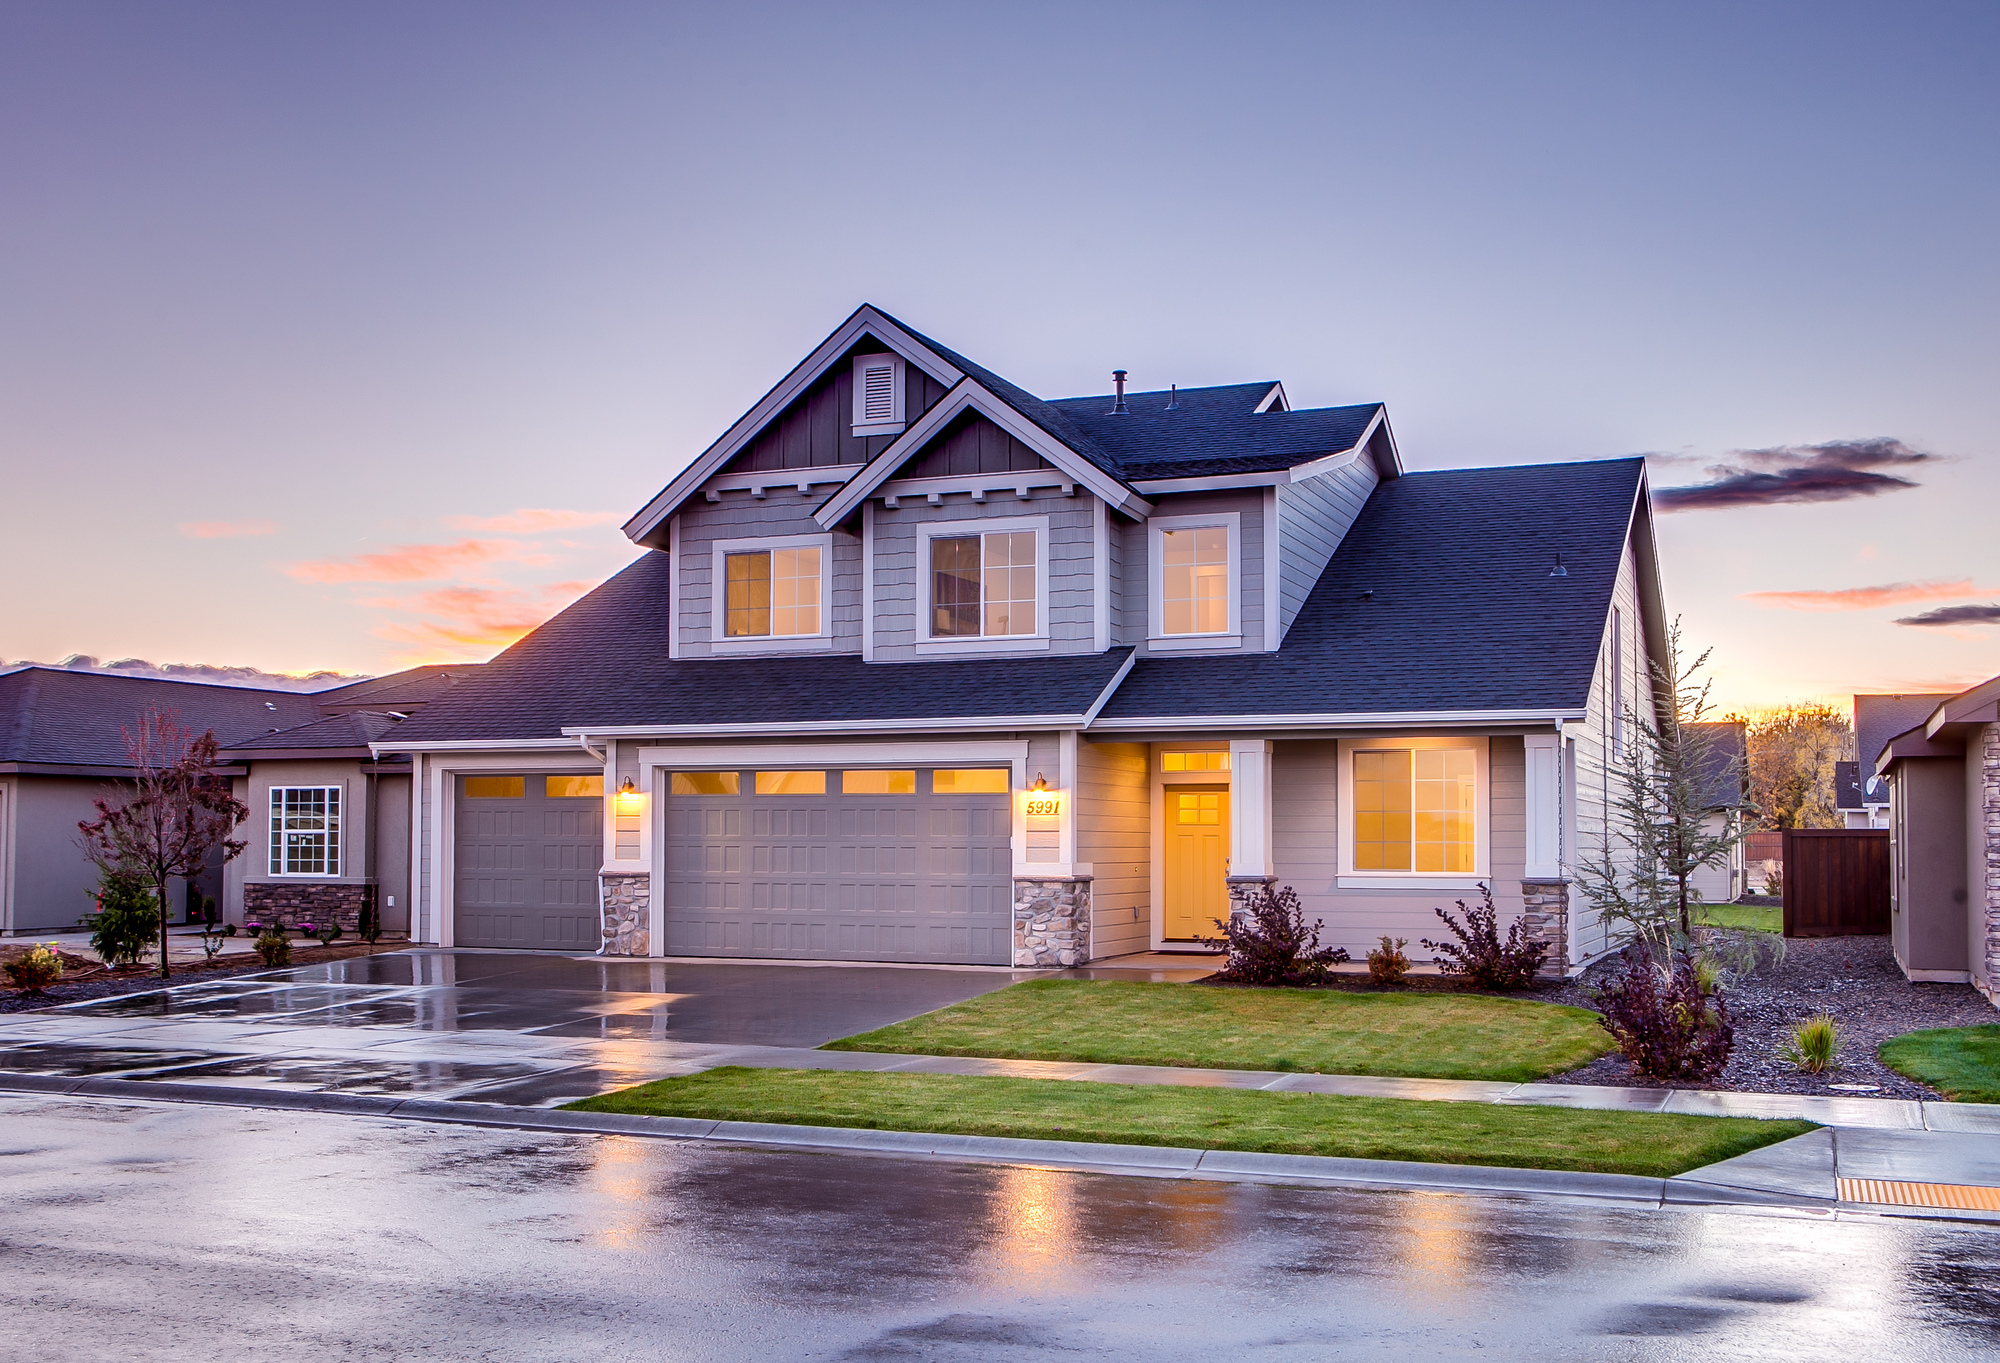 Everything You Should Know Before Buying a House